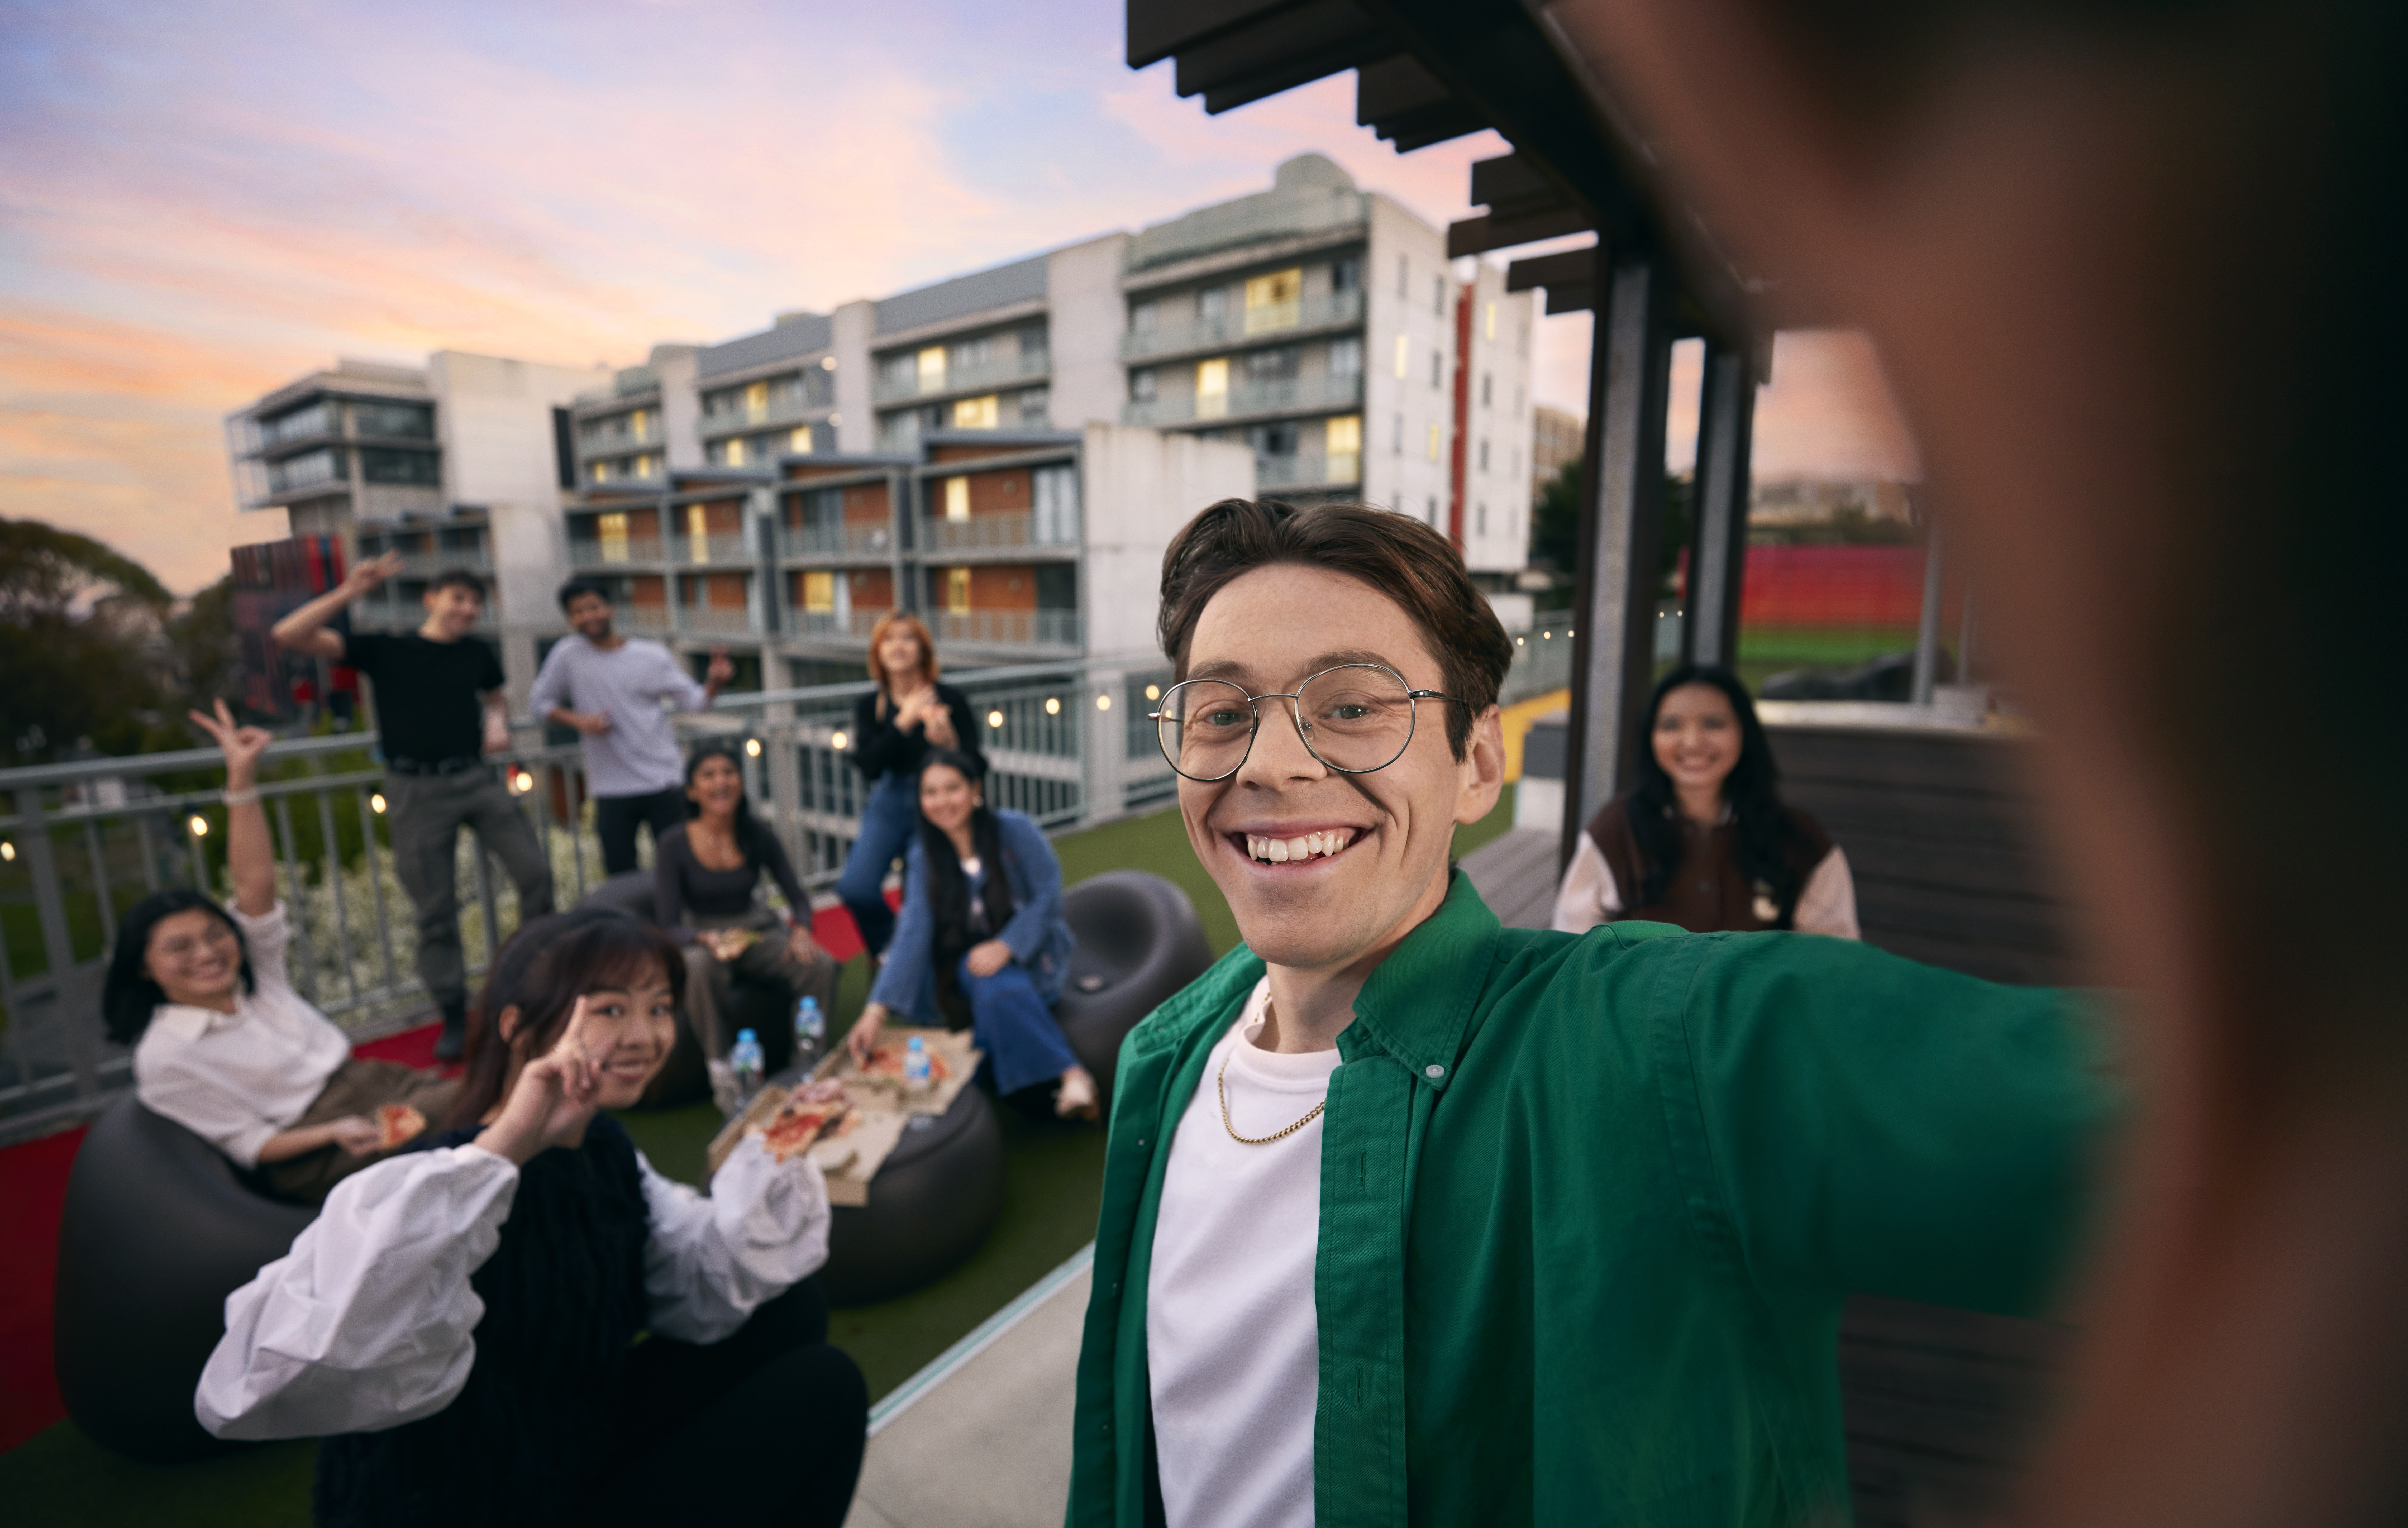 Male student ambassador is taking a photo in selfie style, with group of friends smiling in the background. They are on a balcony eating food with the Hawthorn campus in the background. 